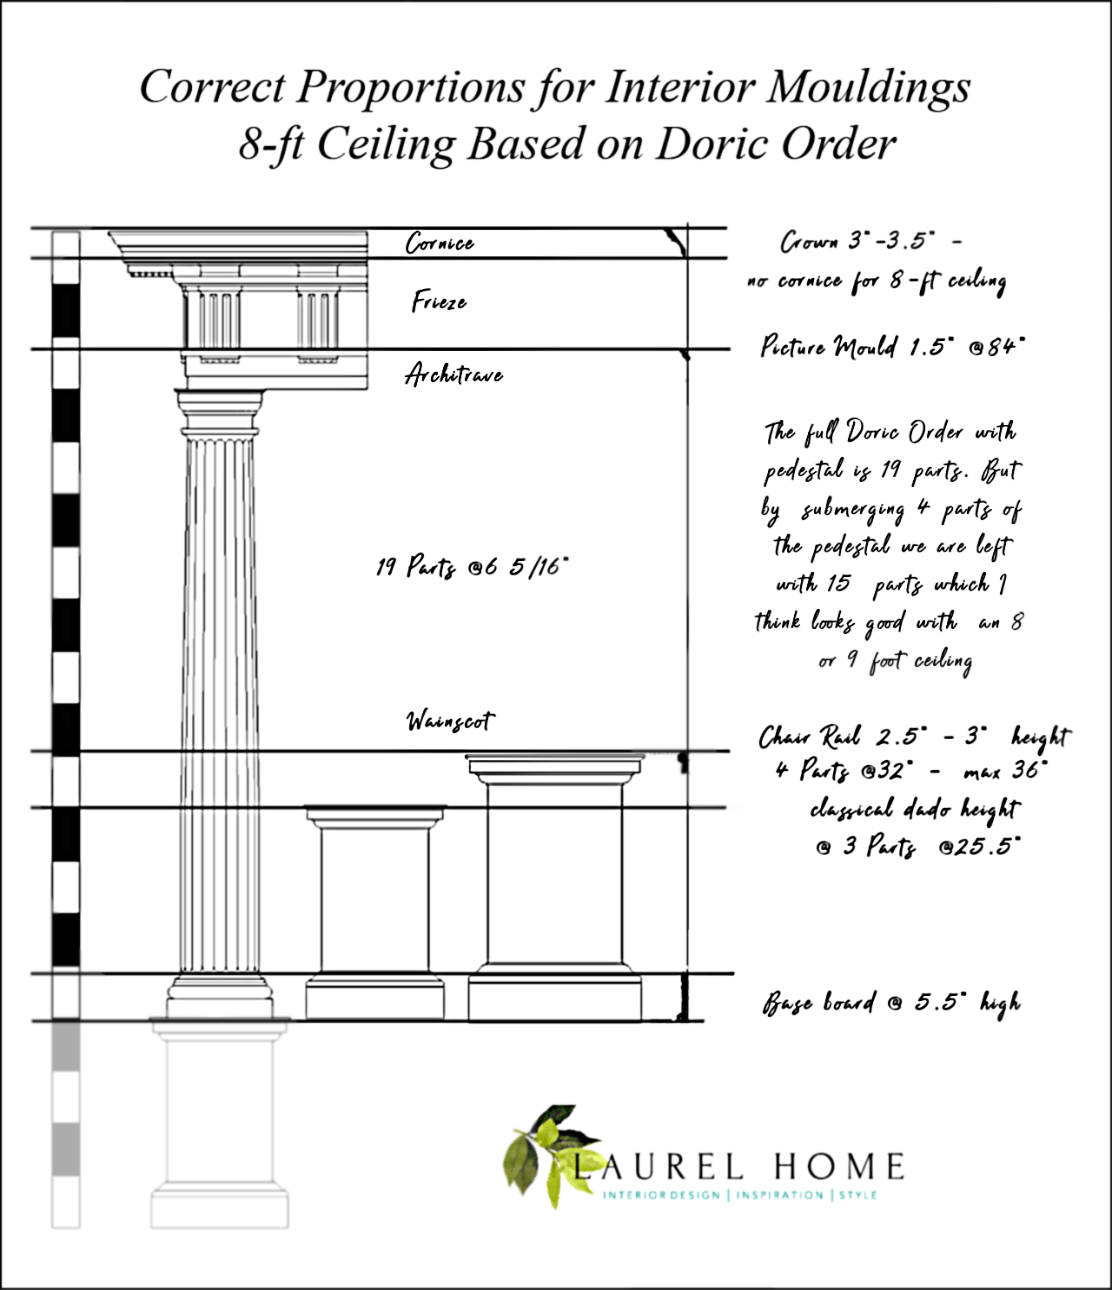 Correct Proportions for Interior Mouldings 8-ft Ceiling Based on Doric Order